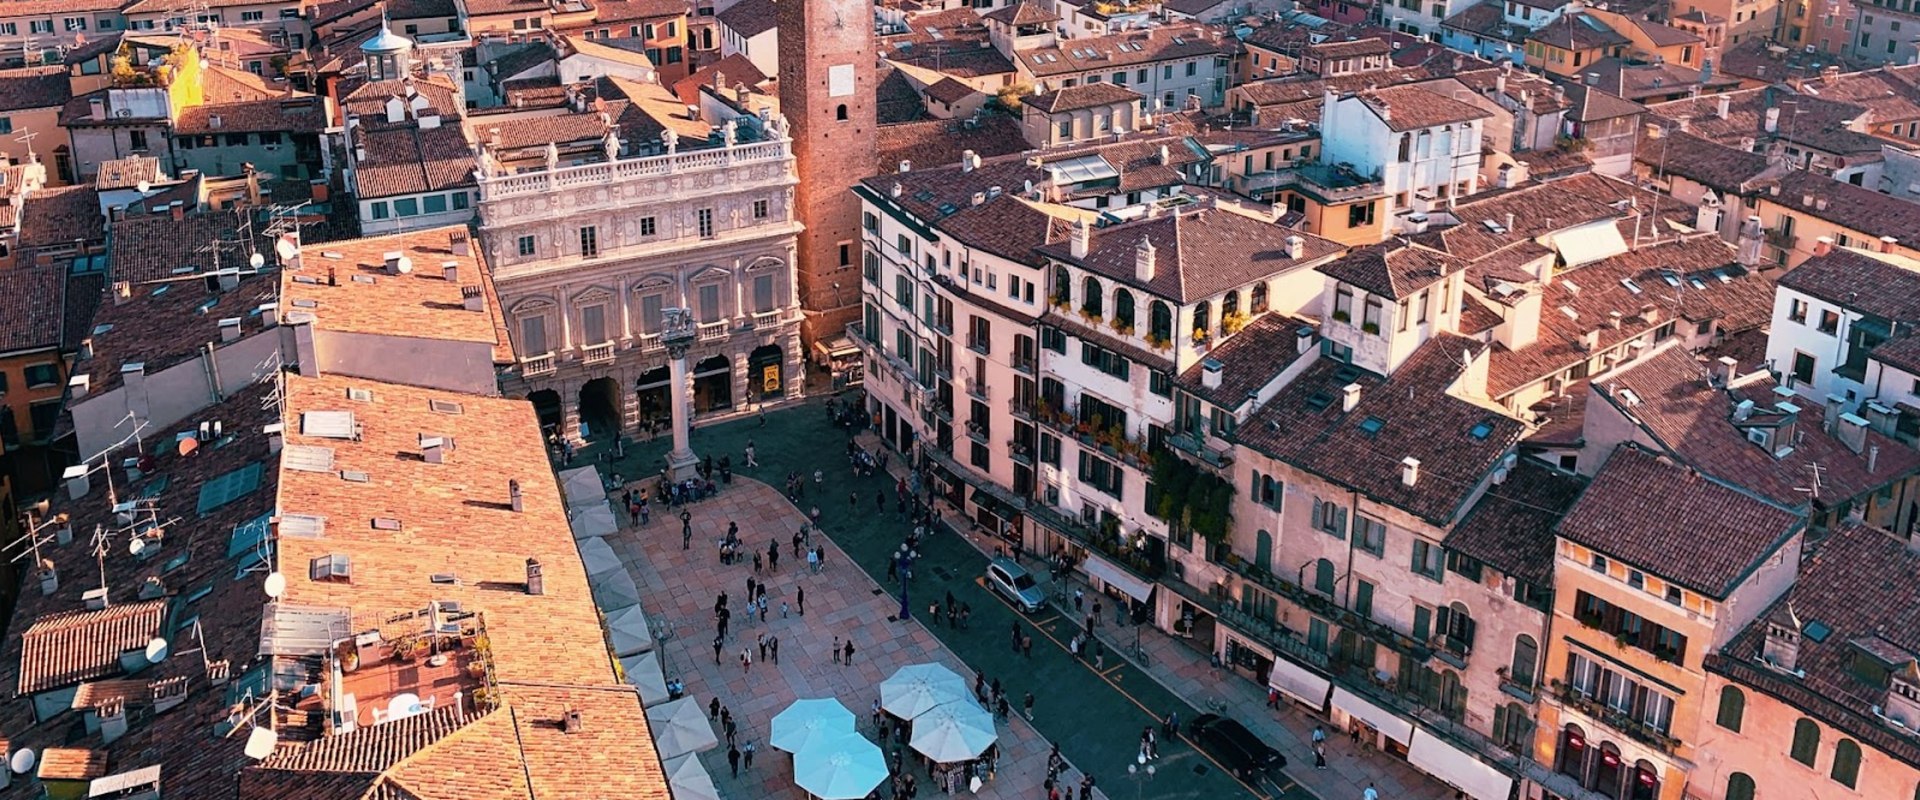 Is Italy an Affordable Country to Live In?